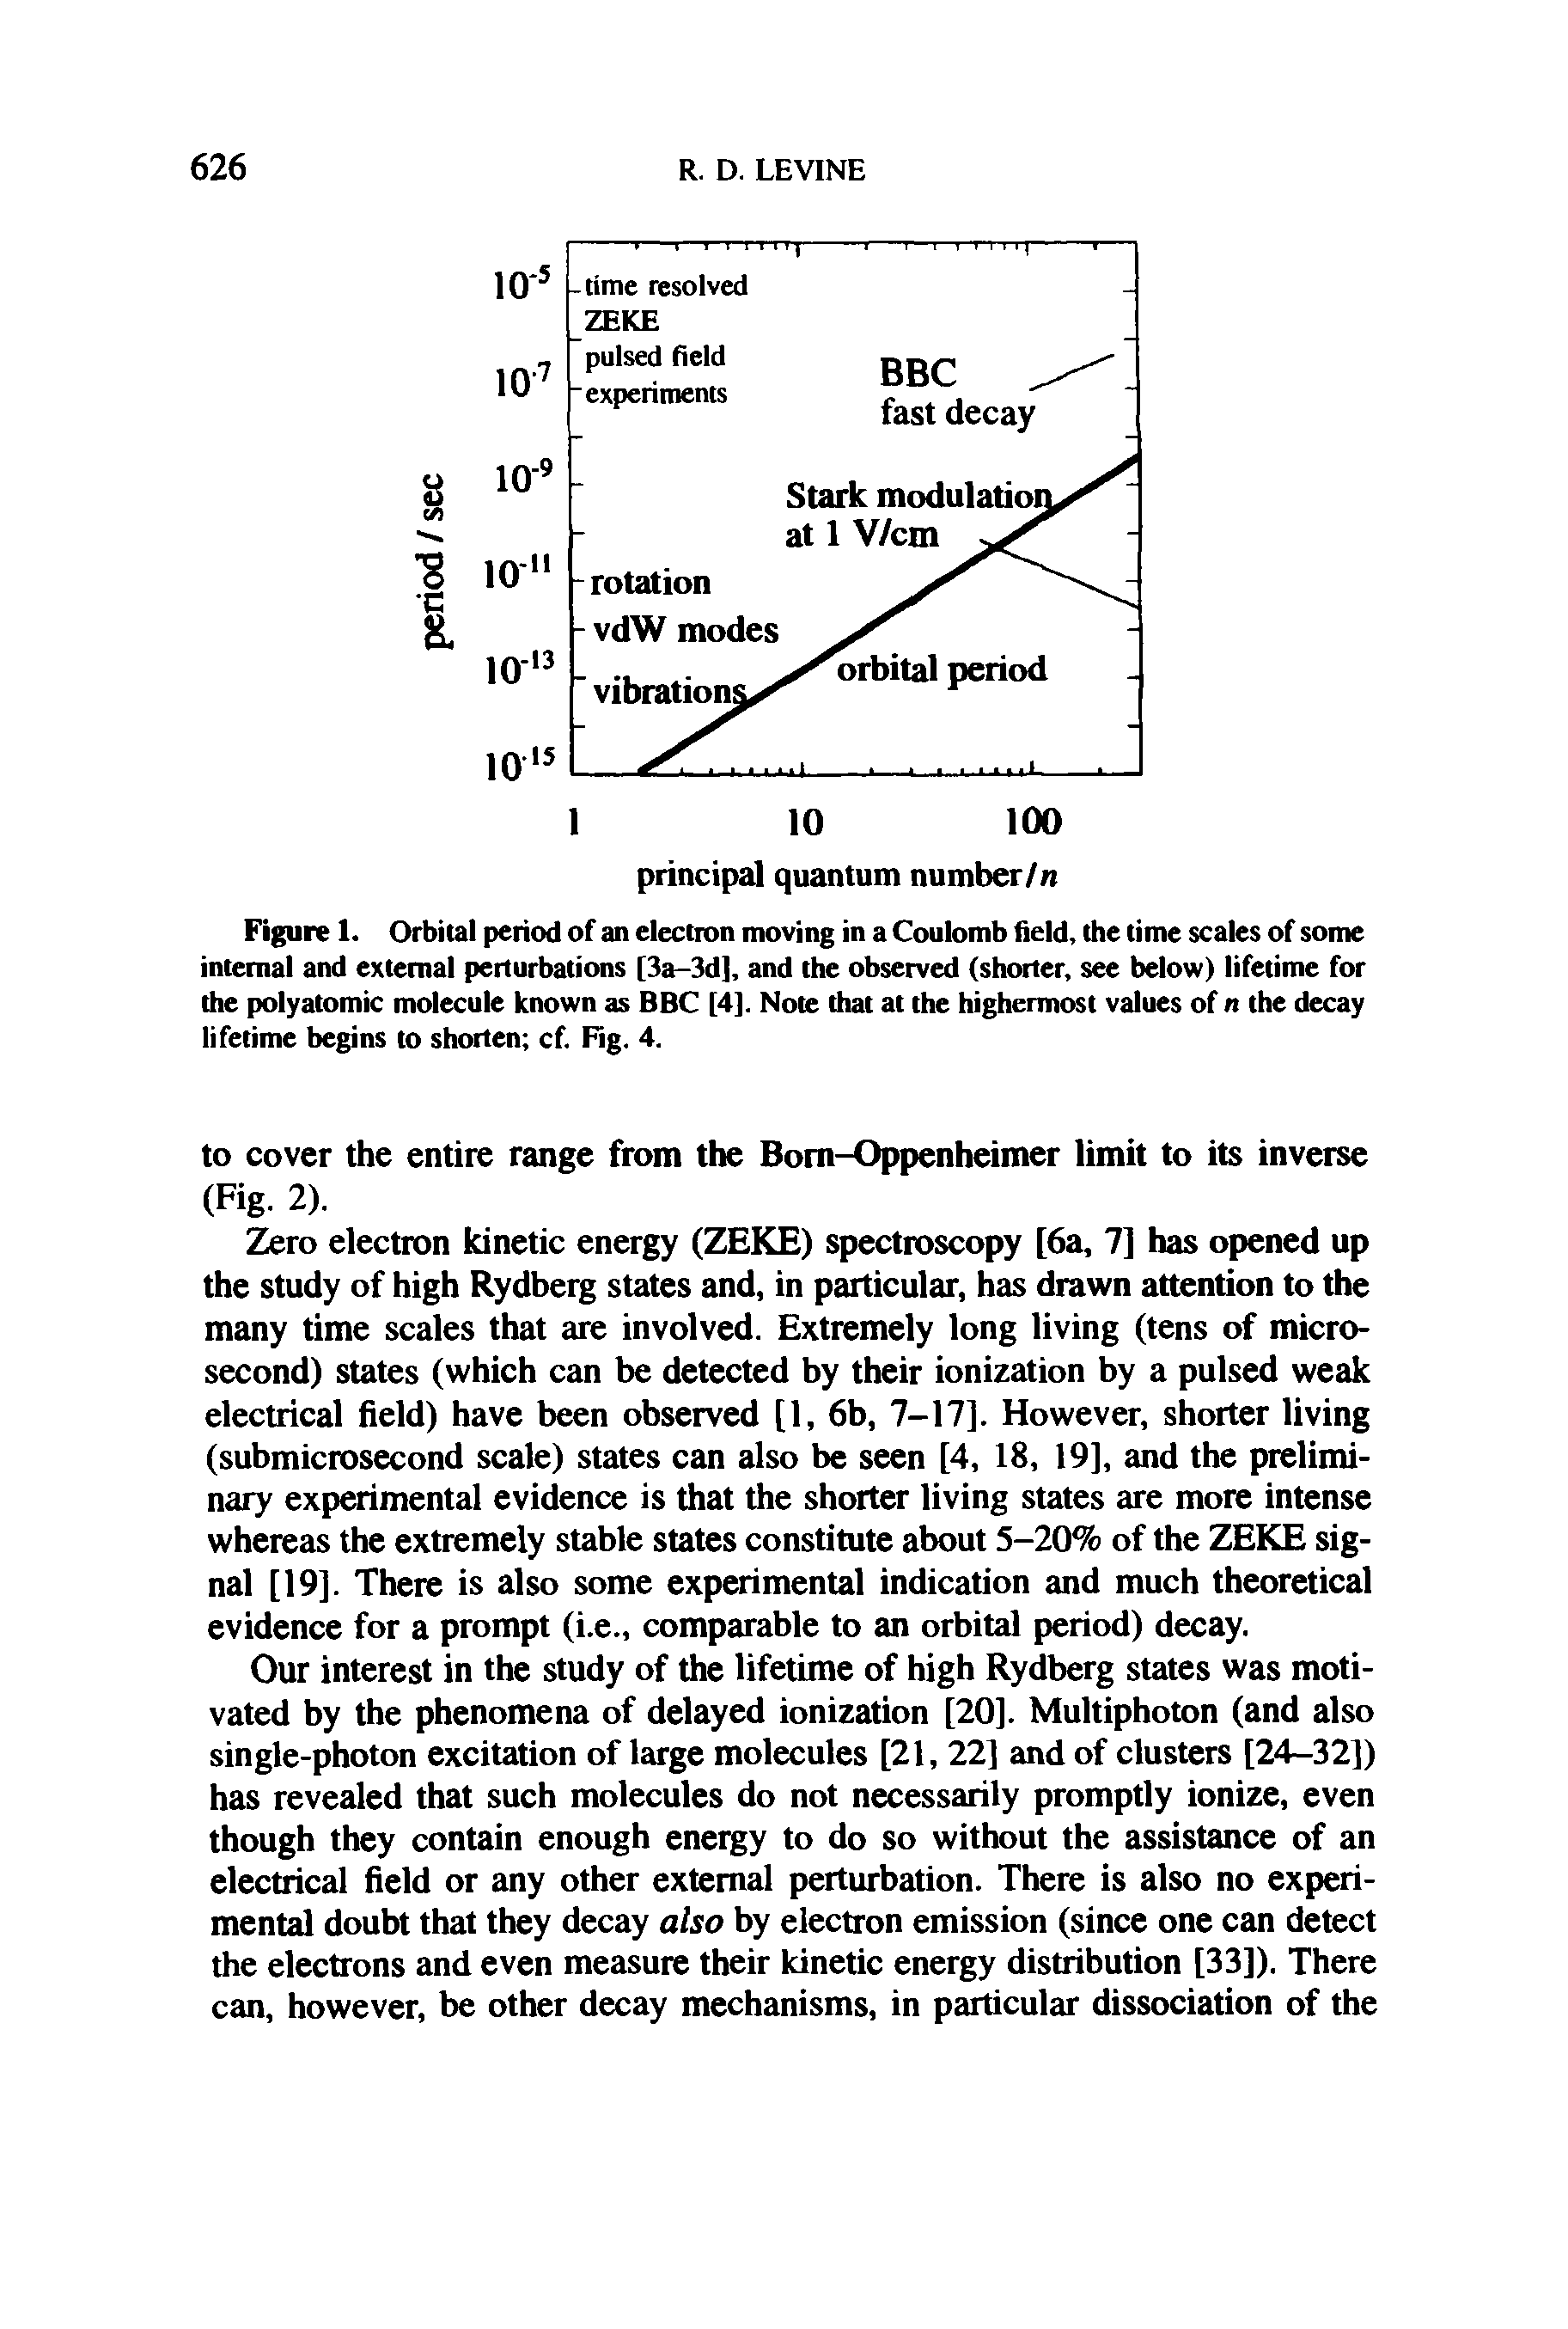 Figure 1. Orbital period of an electron moving in a Coulomb field, the time scales of some internal and external perturbations [3a-3d], and the observed (shorter, see below) lifetime for the polyatomic molecule known as BBC [4]. Note that at the highermost values of n the decay lifetime begins to shorten cf. Fig. 4.